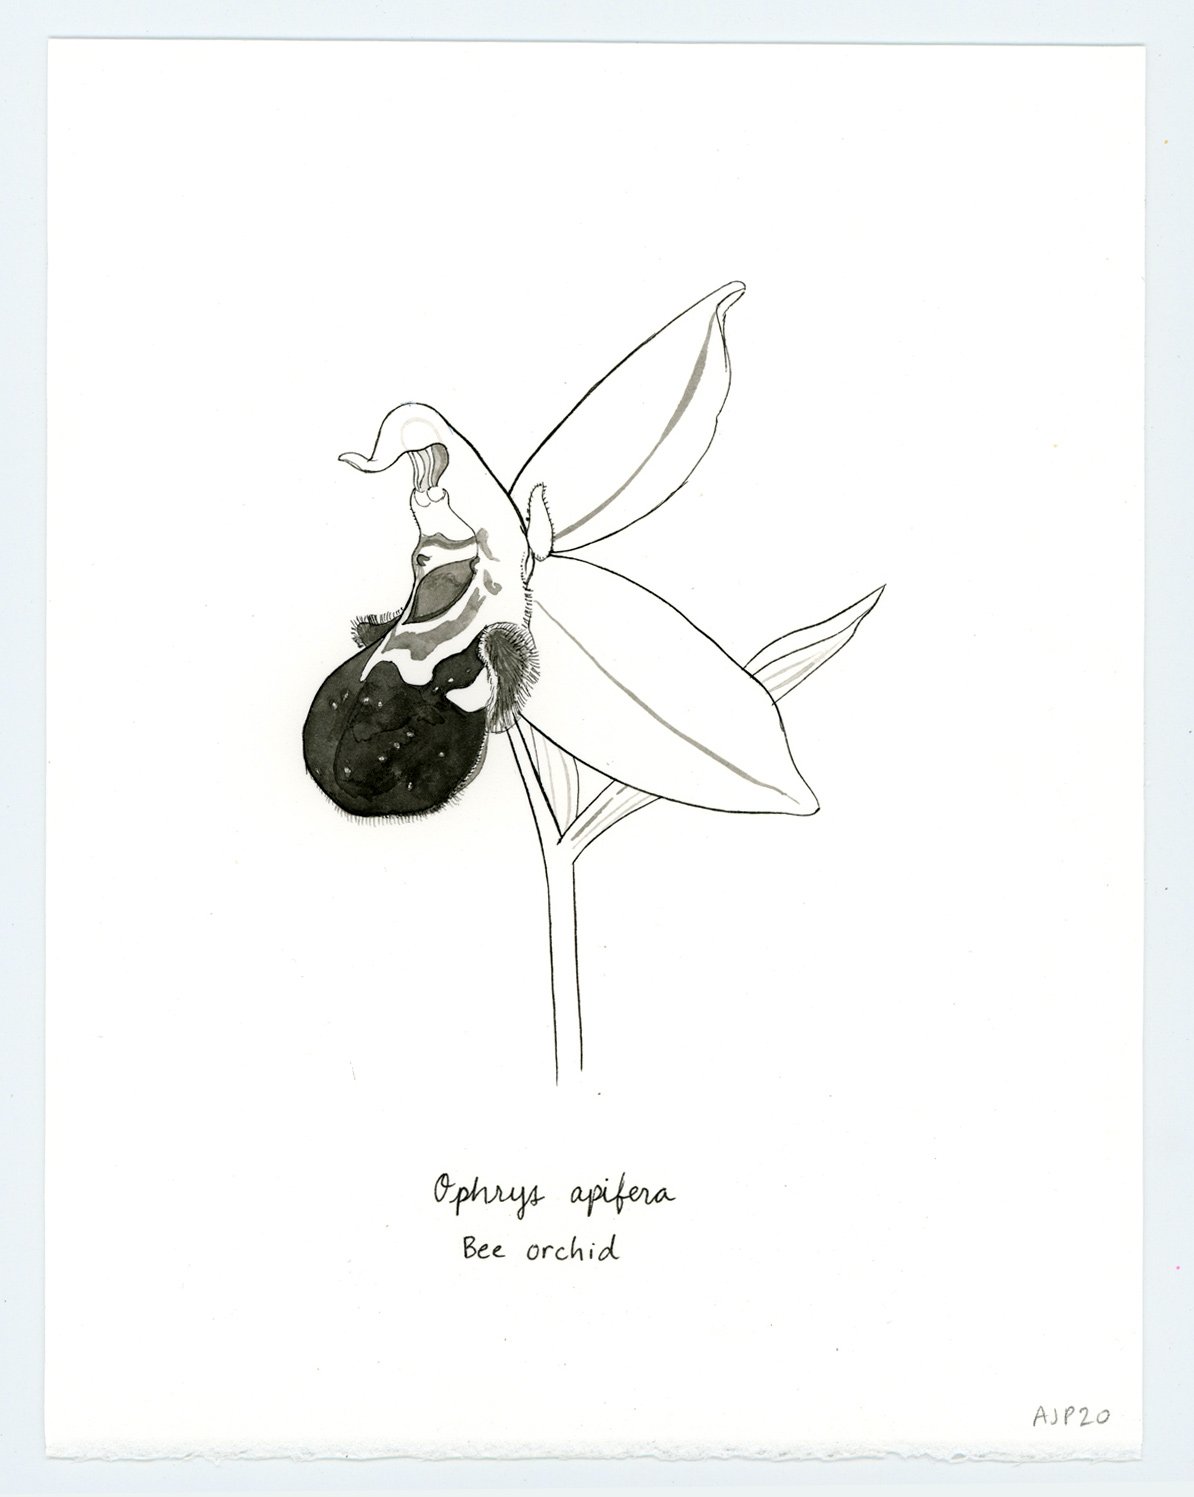 Ophrys apifera / Bee orchid